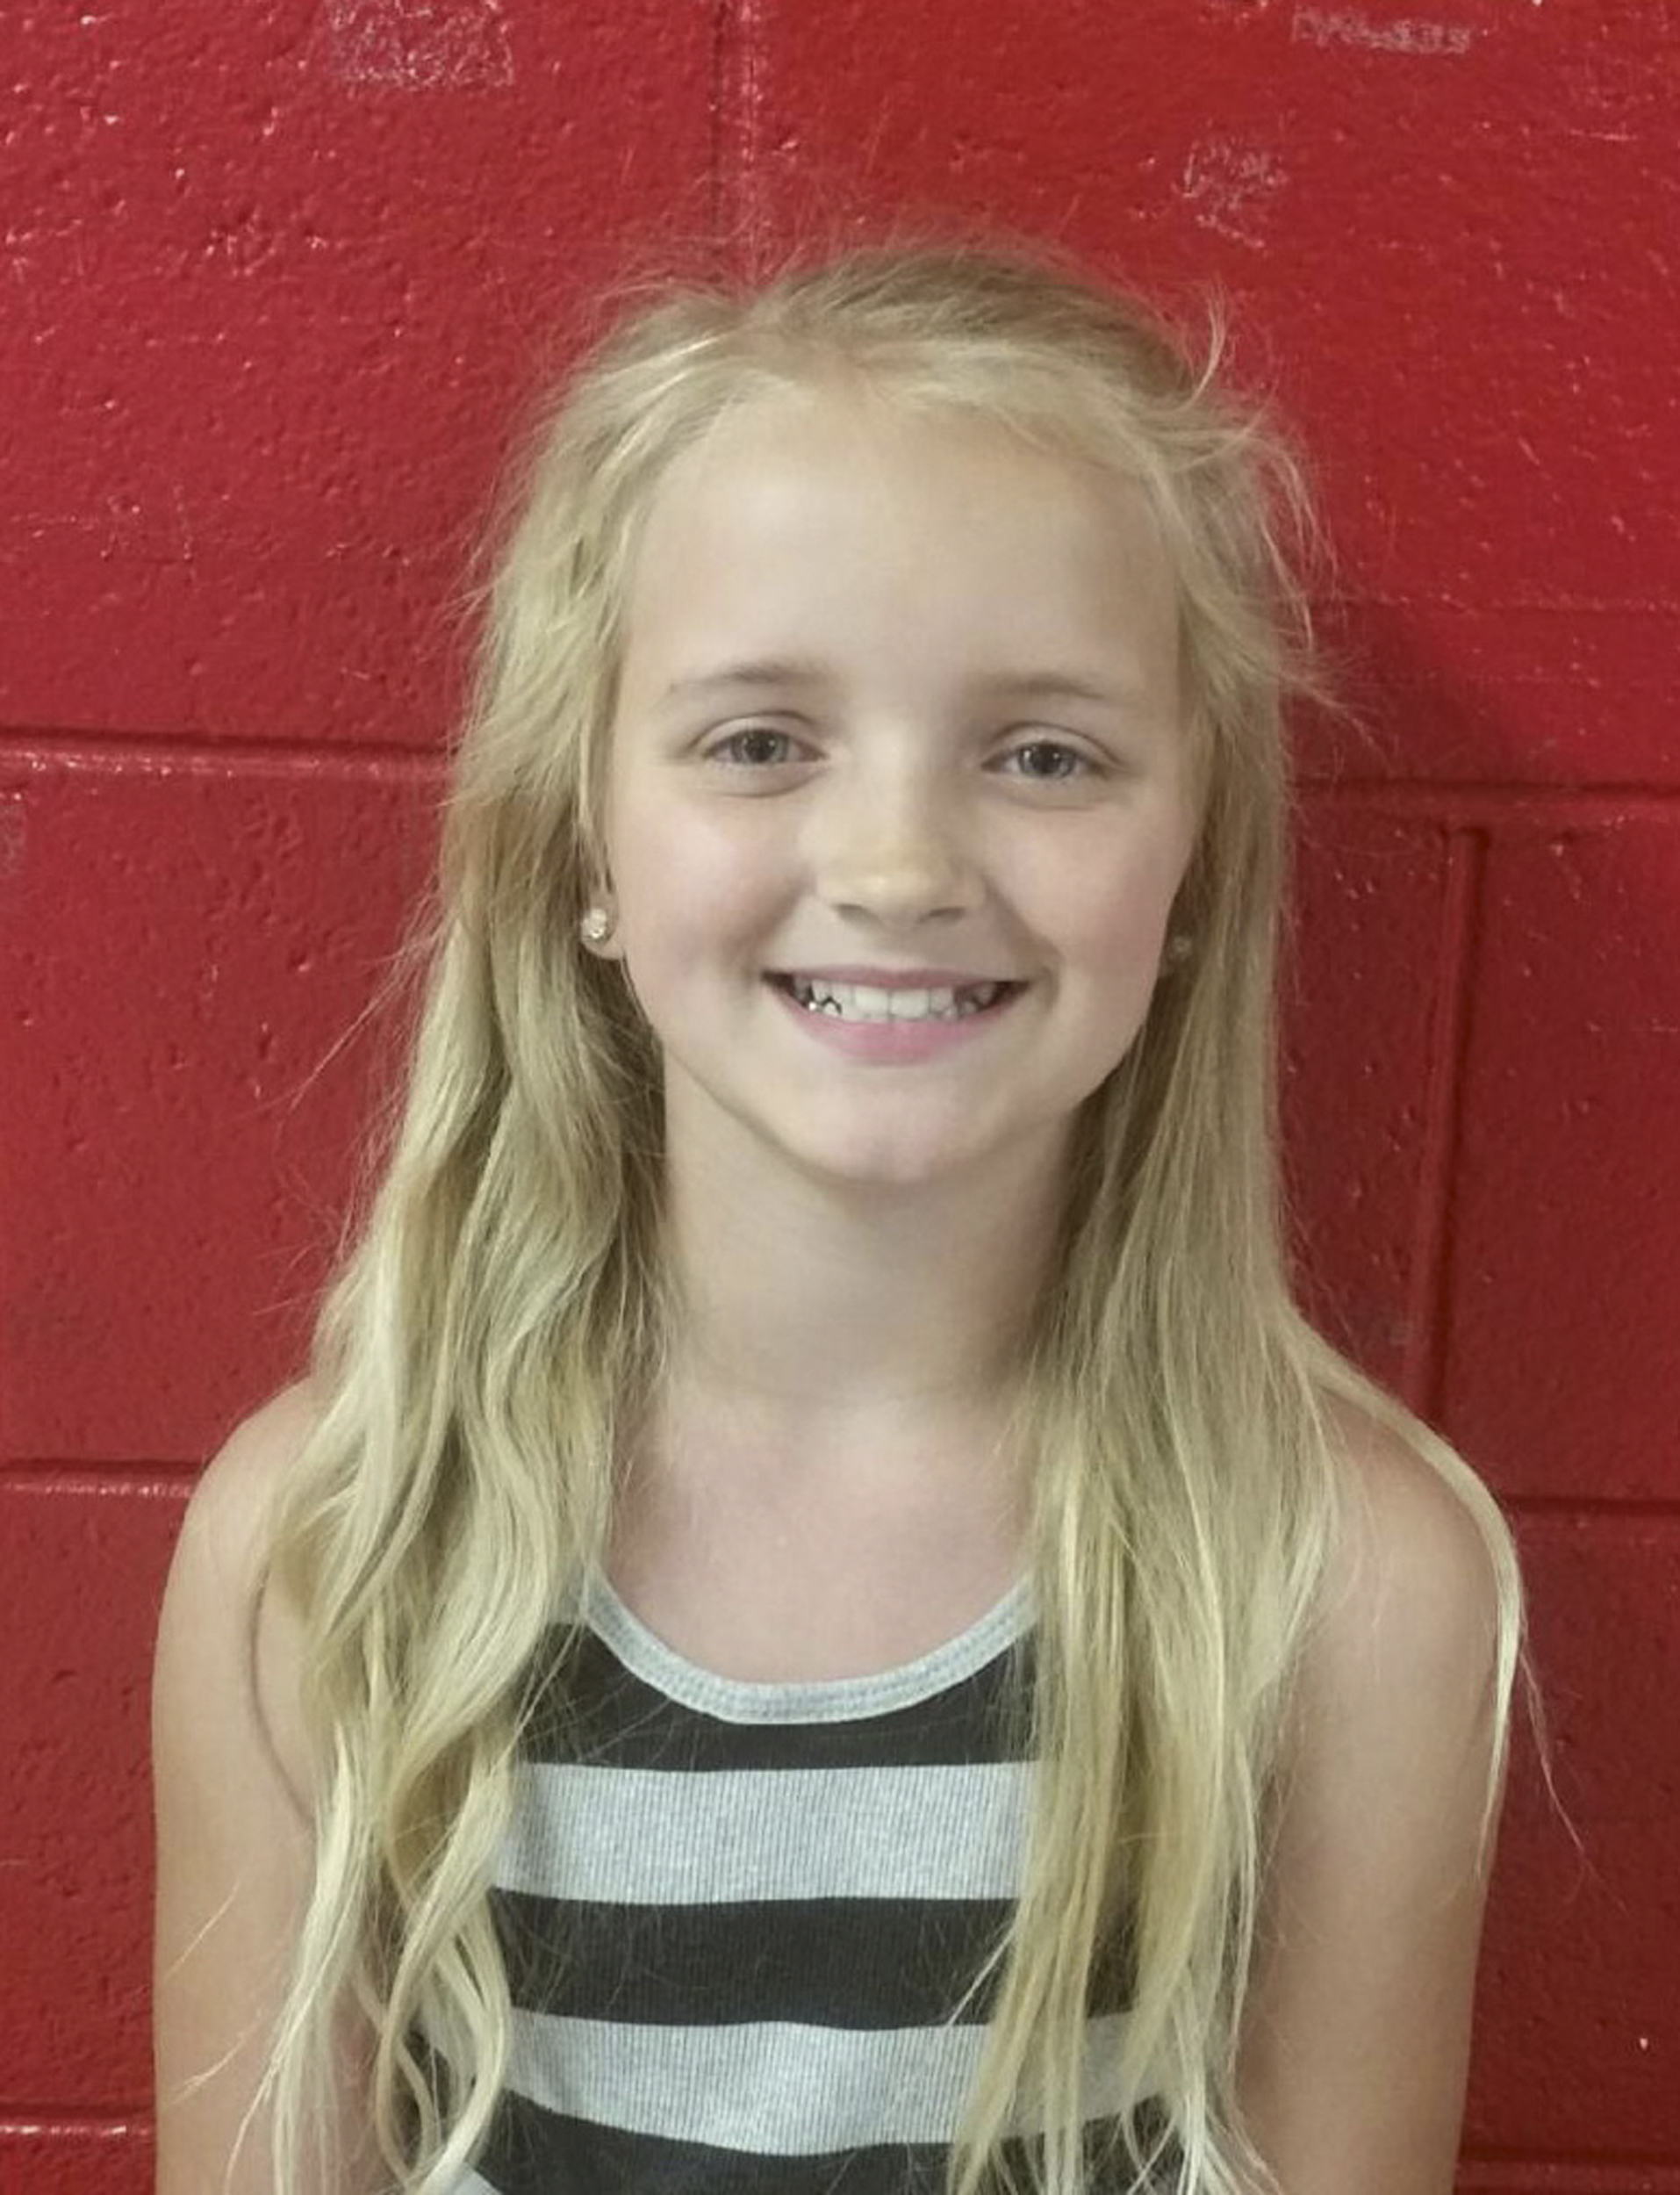 This undated photo provided by the Tennessee Bureau of Investigation shows Carlie Marie Trent, 9, of Rogersville, Tenn. (Tennessee Bureau of Investigation/AP)